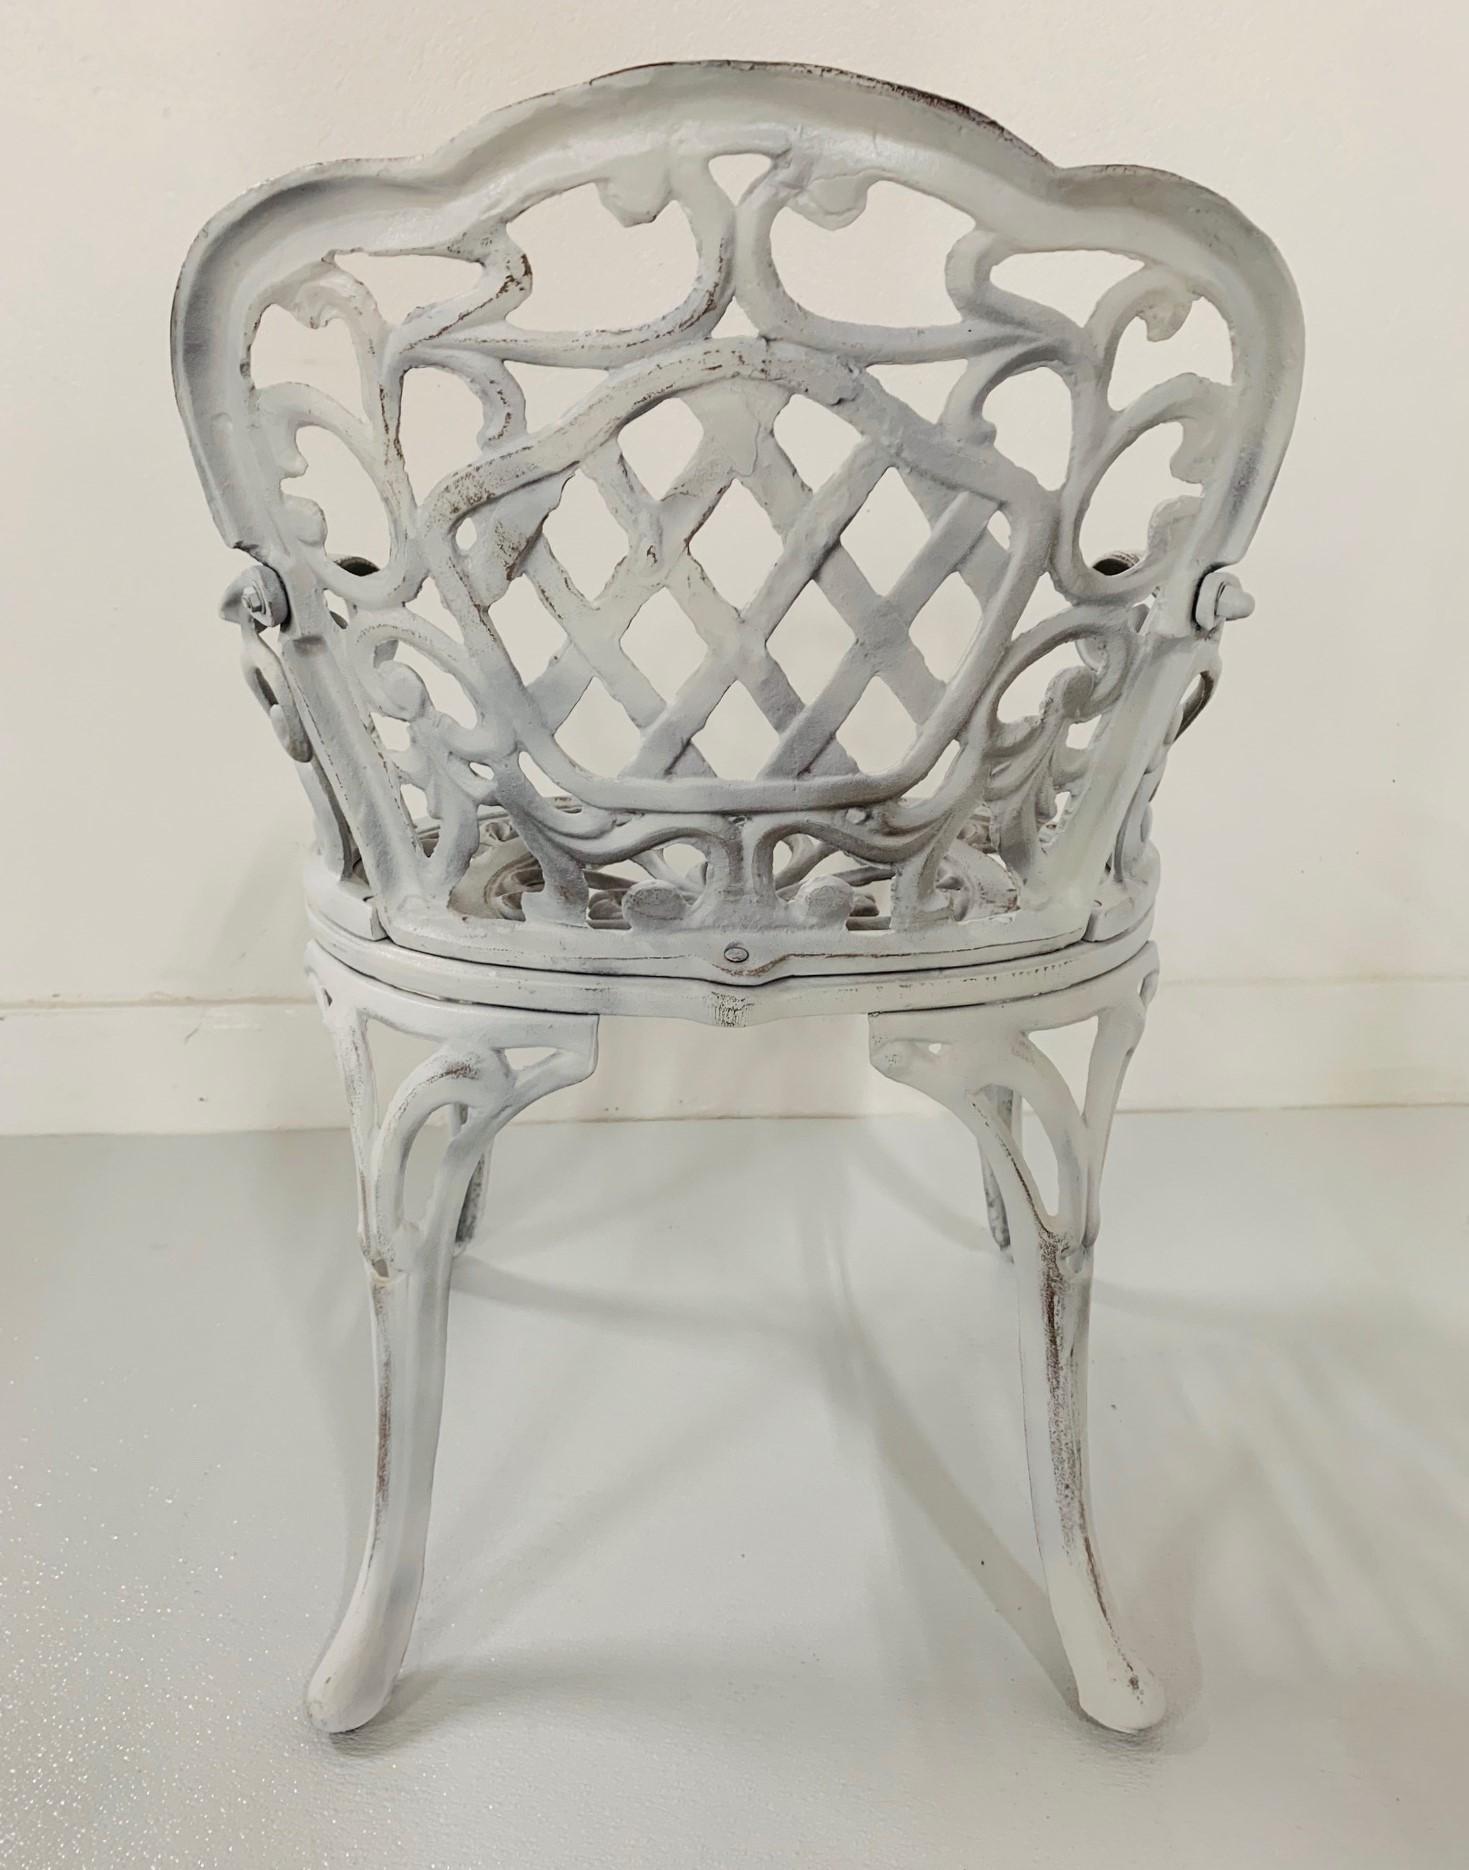 cast iron chairs